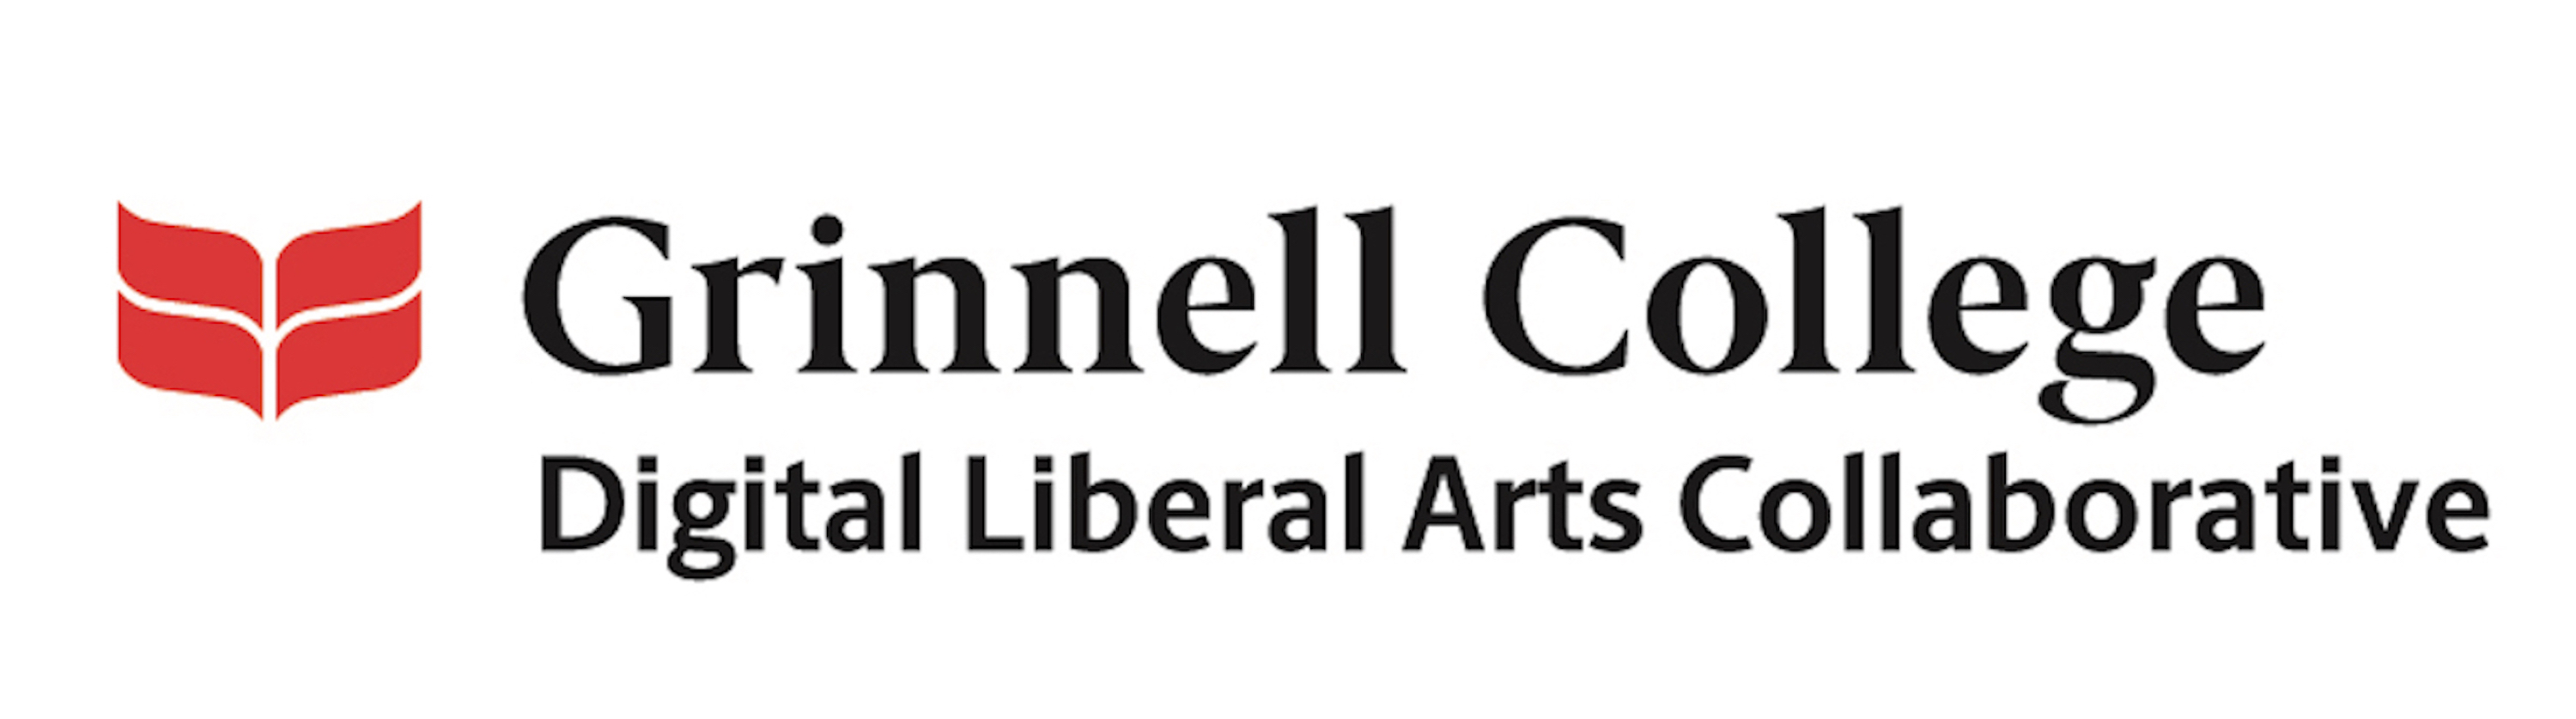 Sites at Grinnell College